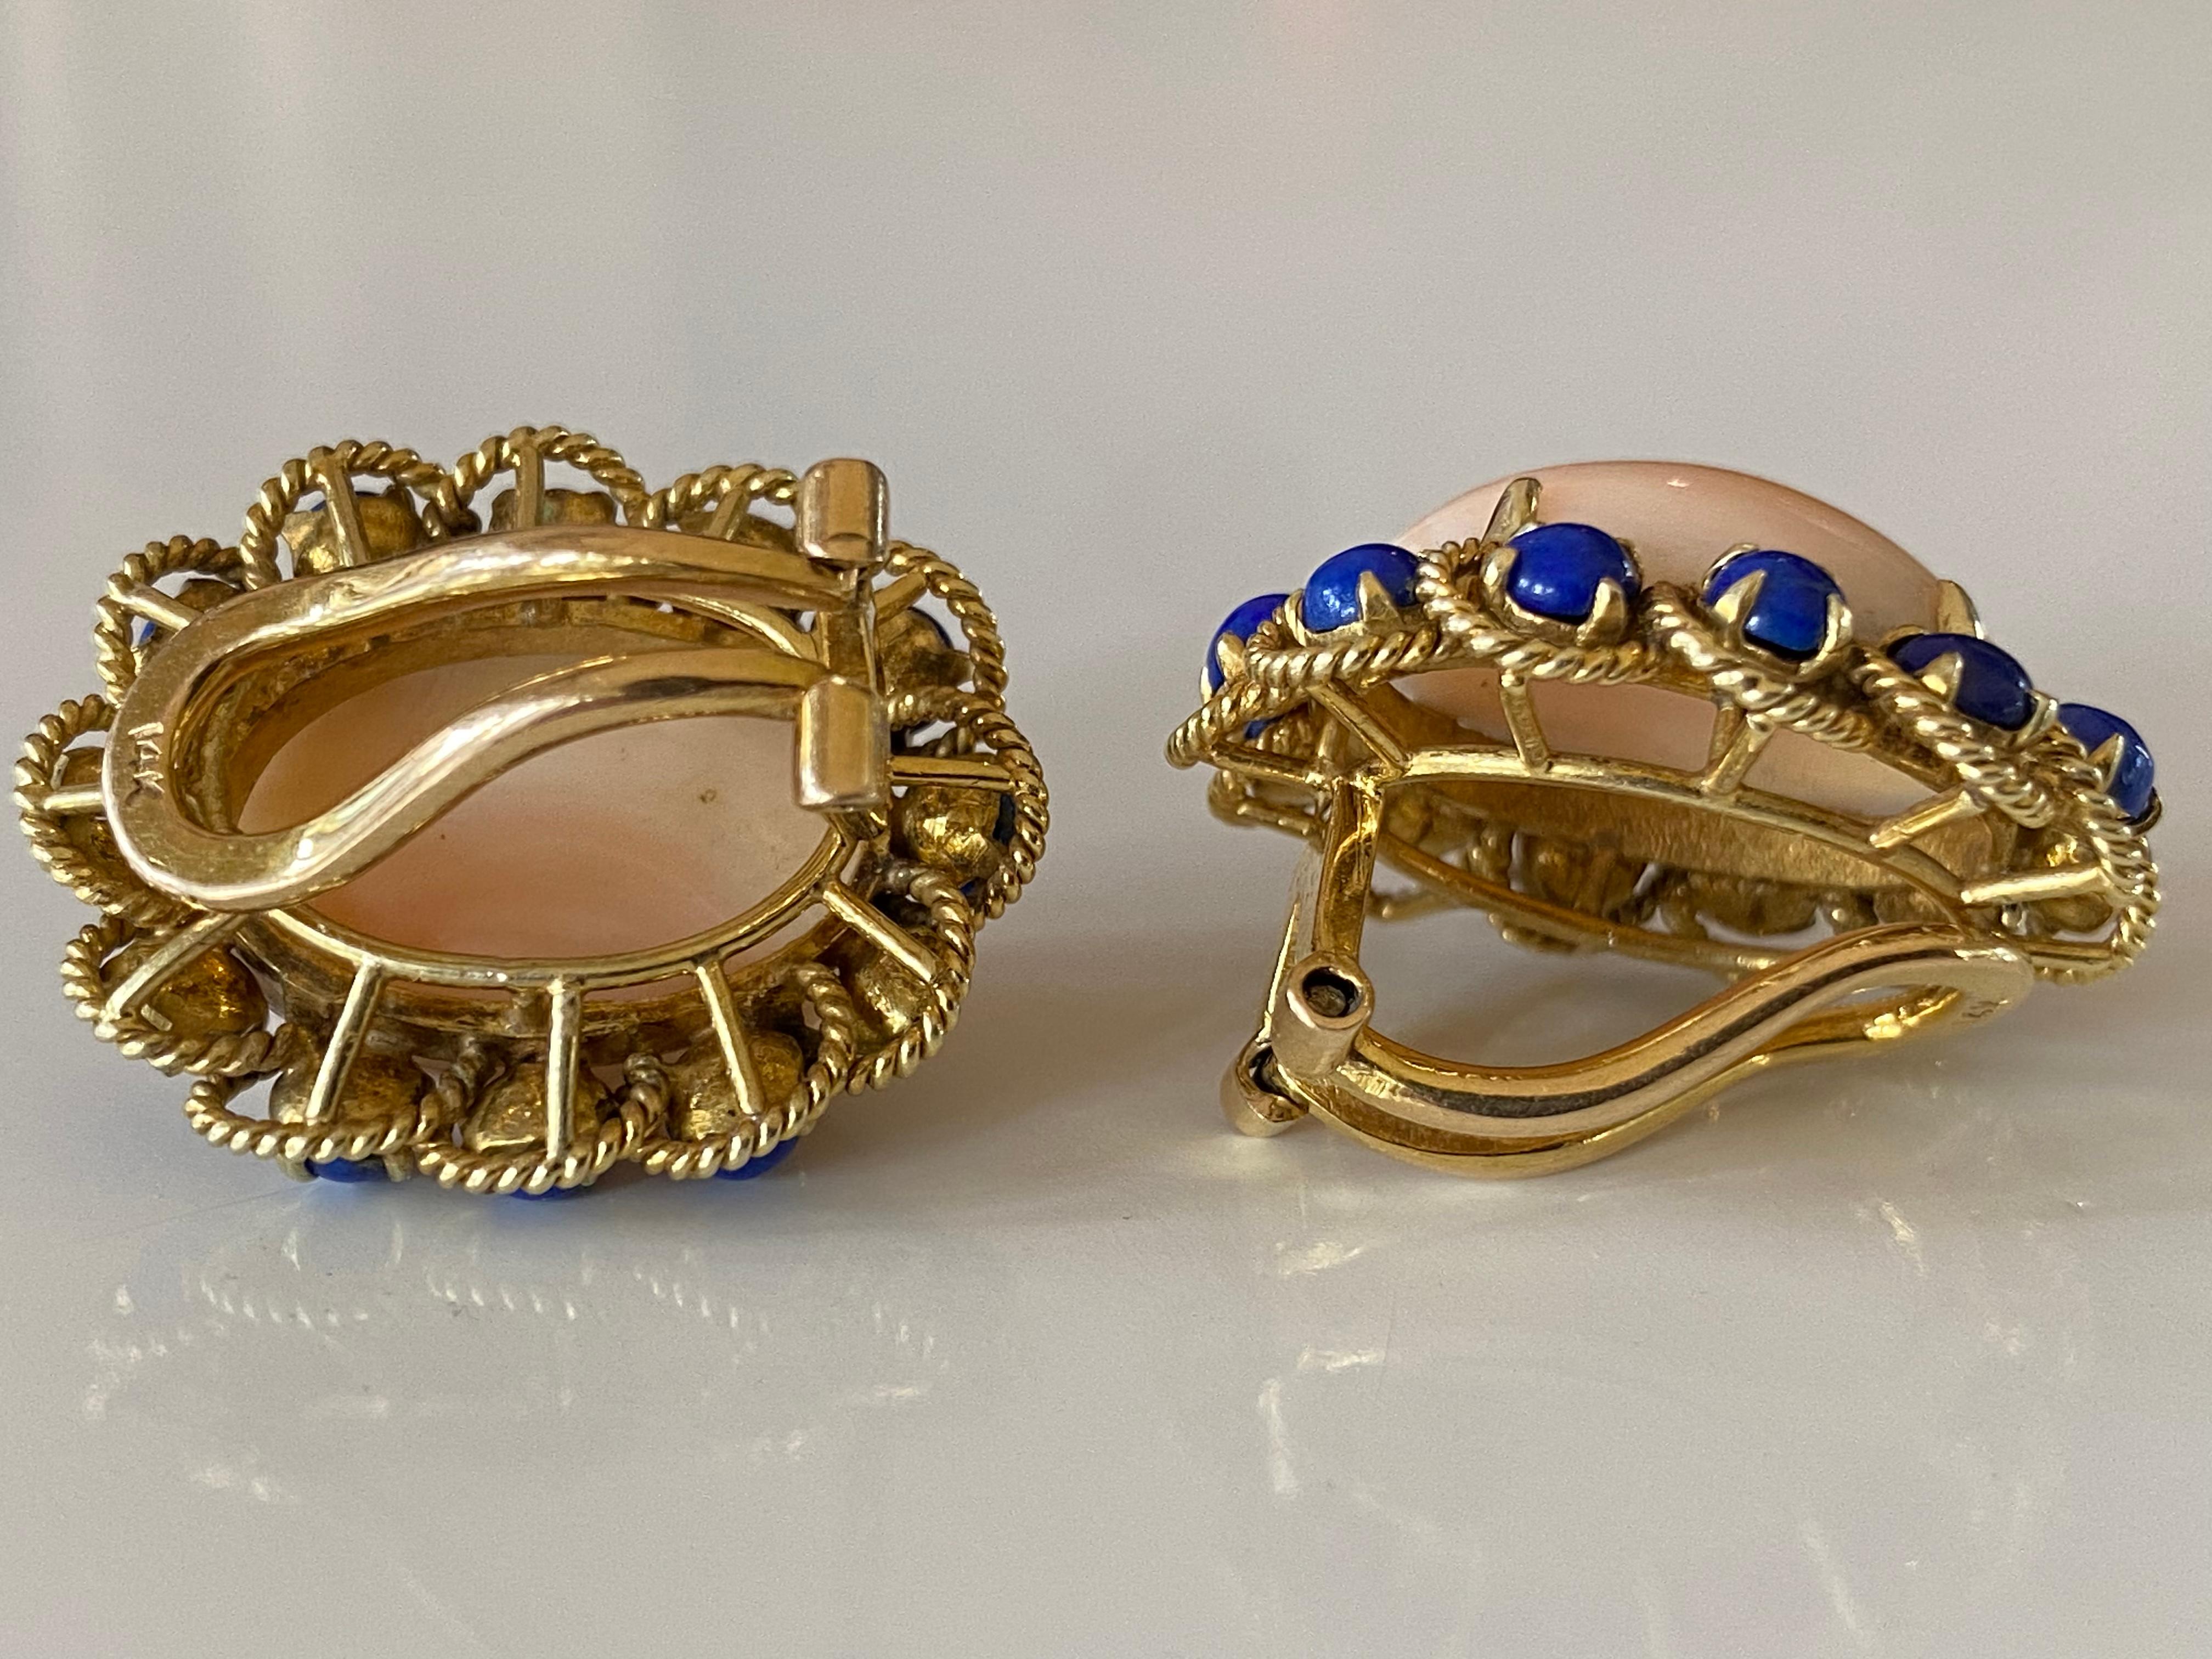 Estate Coral and Lapus Lazuli Earrings In Good Condition For Sale In Denver, CO